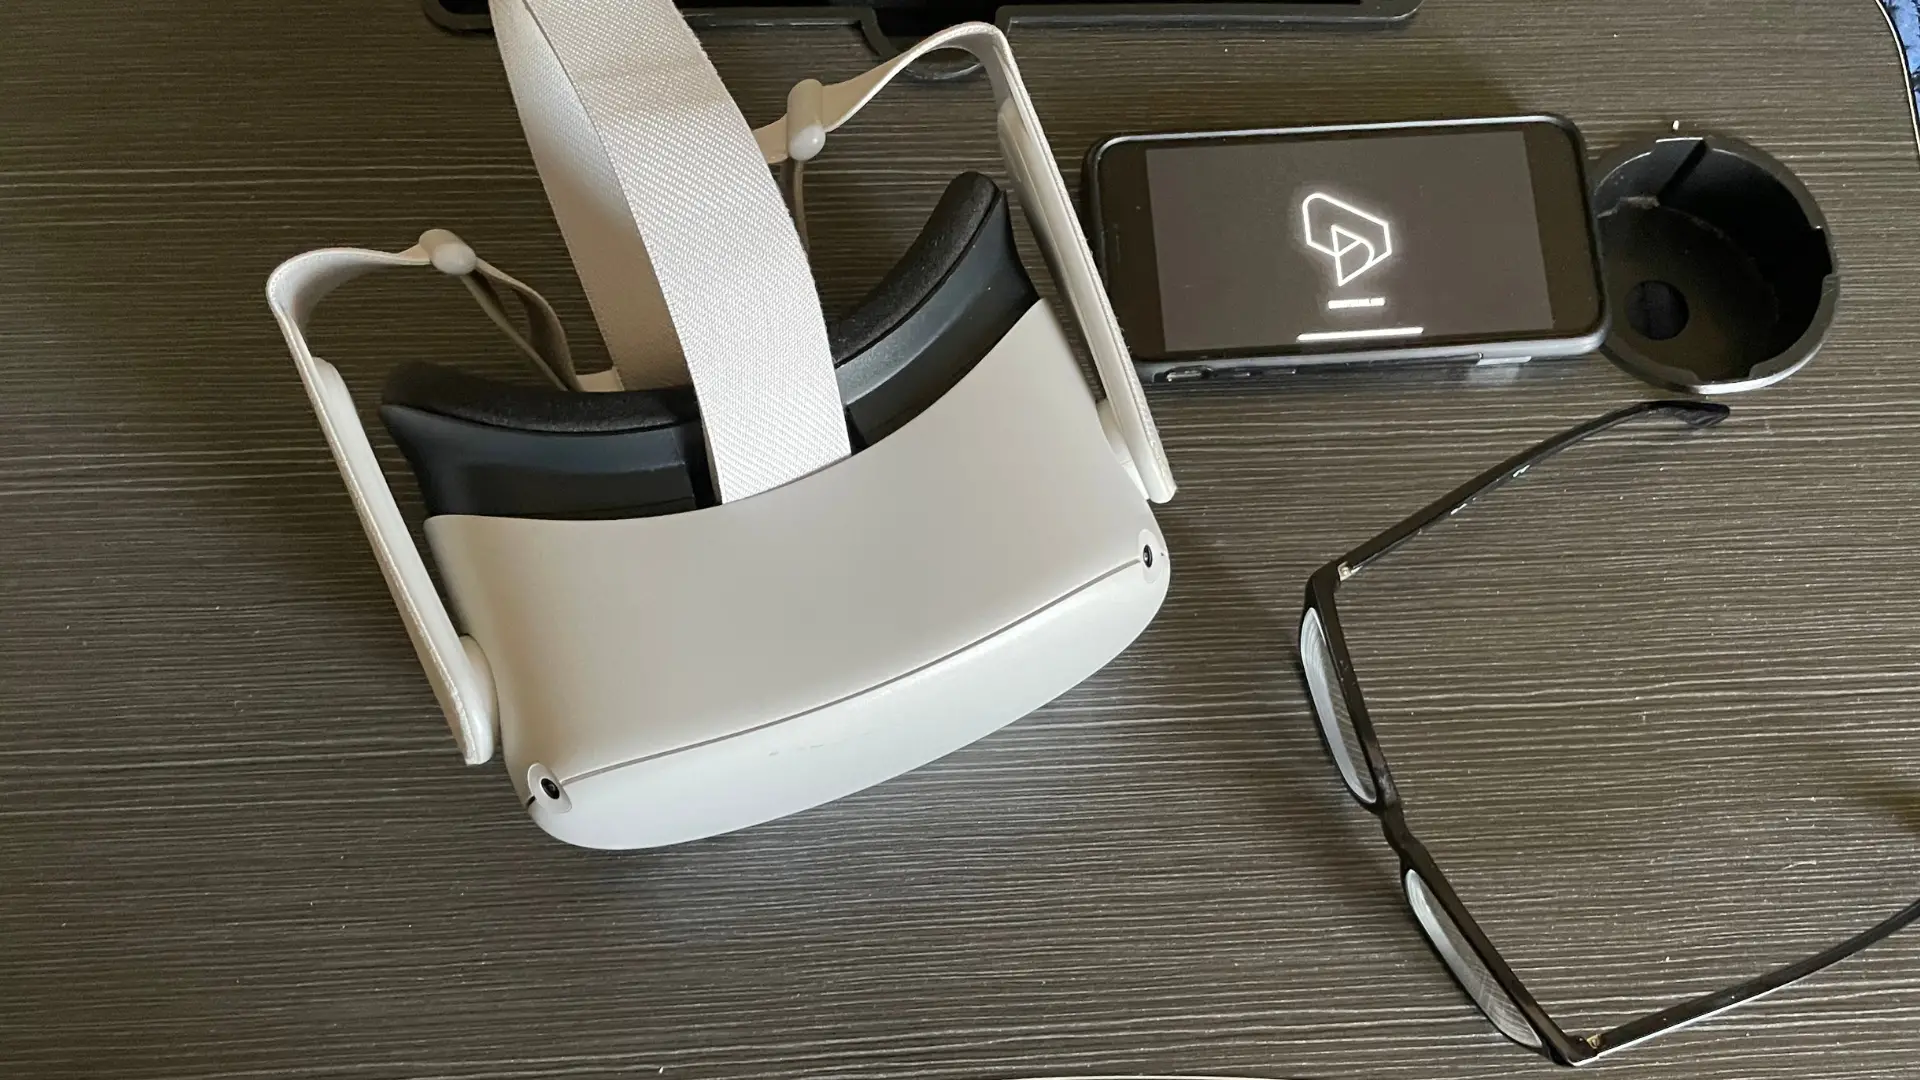 How To Wear Glasses Appropriately With The Oculus Quest 2